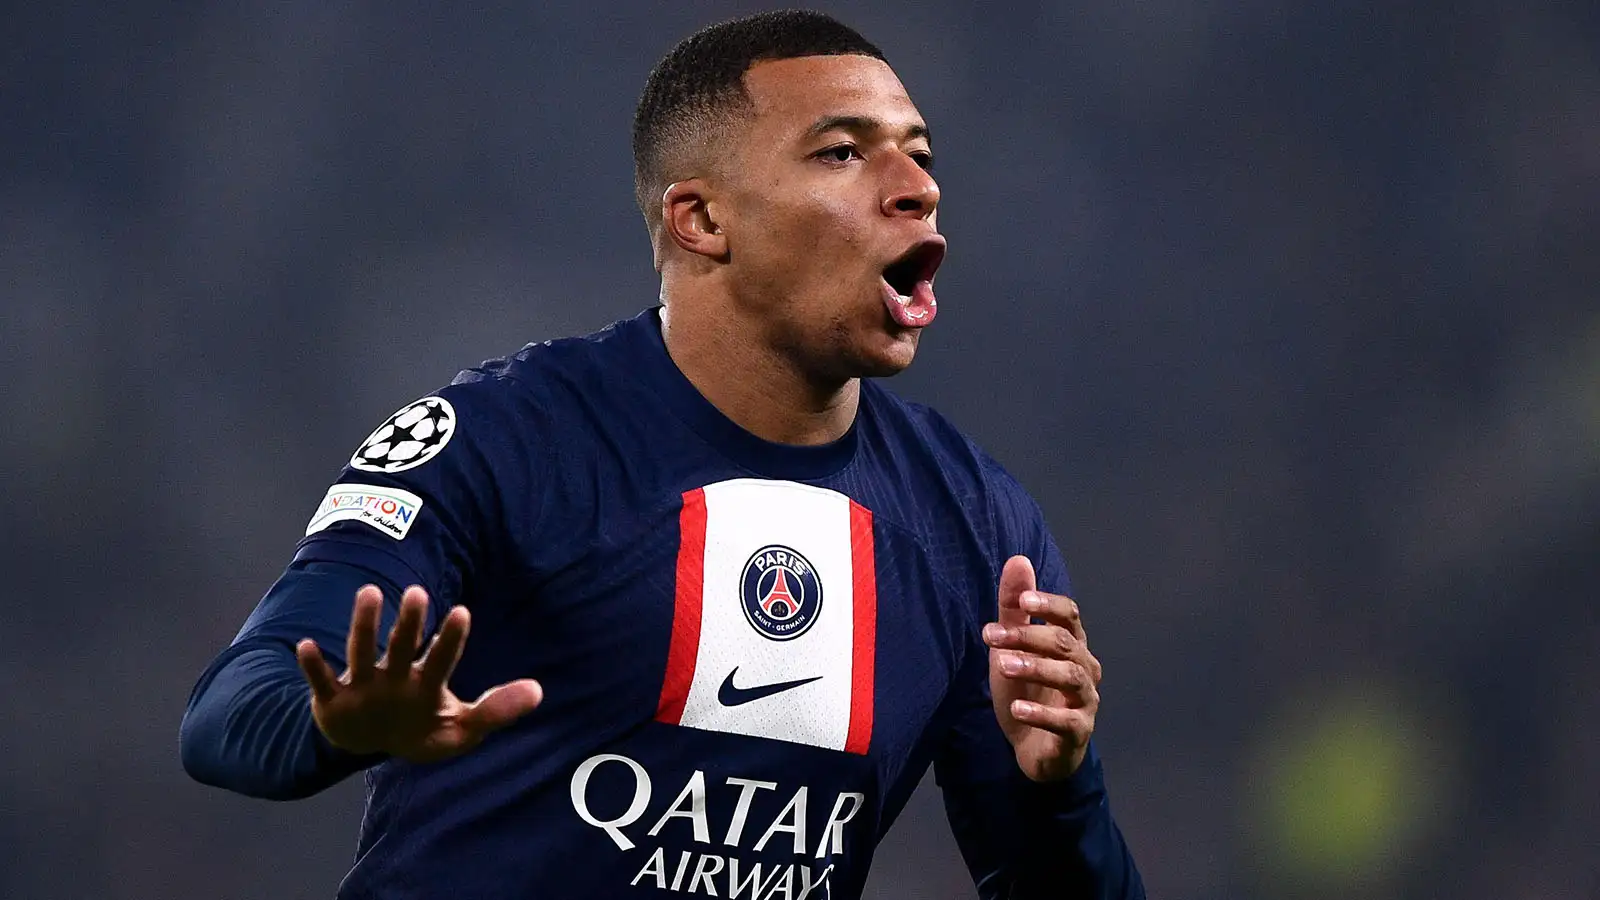 Mbappe’s next club: Potential destinations for PSG star ranked from least to most likely